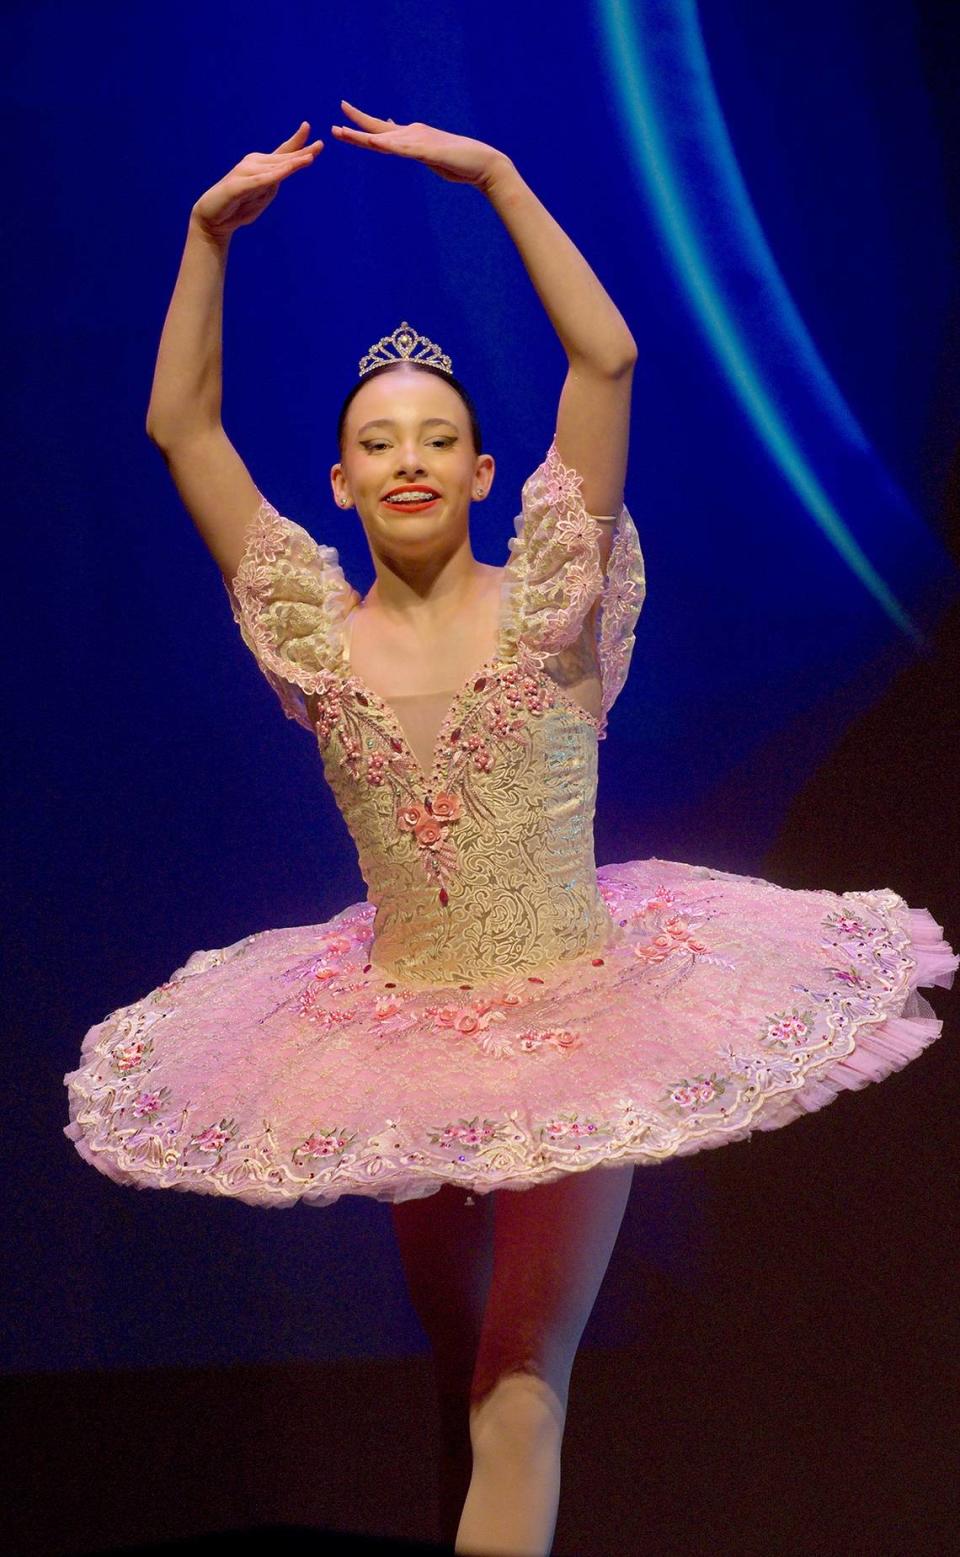 Maribelle Juvier, 12, of Miami Arts Studio 6-12 @ Zelda Glazer, performs on the Actors’ Playhouse stage at the Miracle Theatre in Coral Gables during finals of Young Talent Big Dreams 2024 on May 11, 2024. Maribelle won the Individual Dance category.